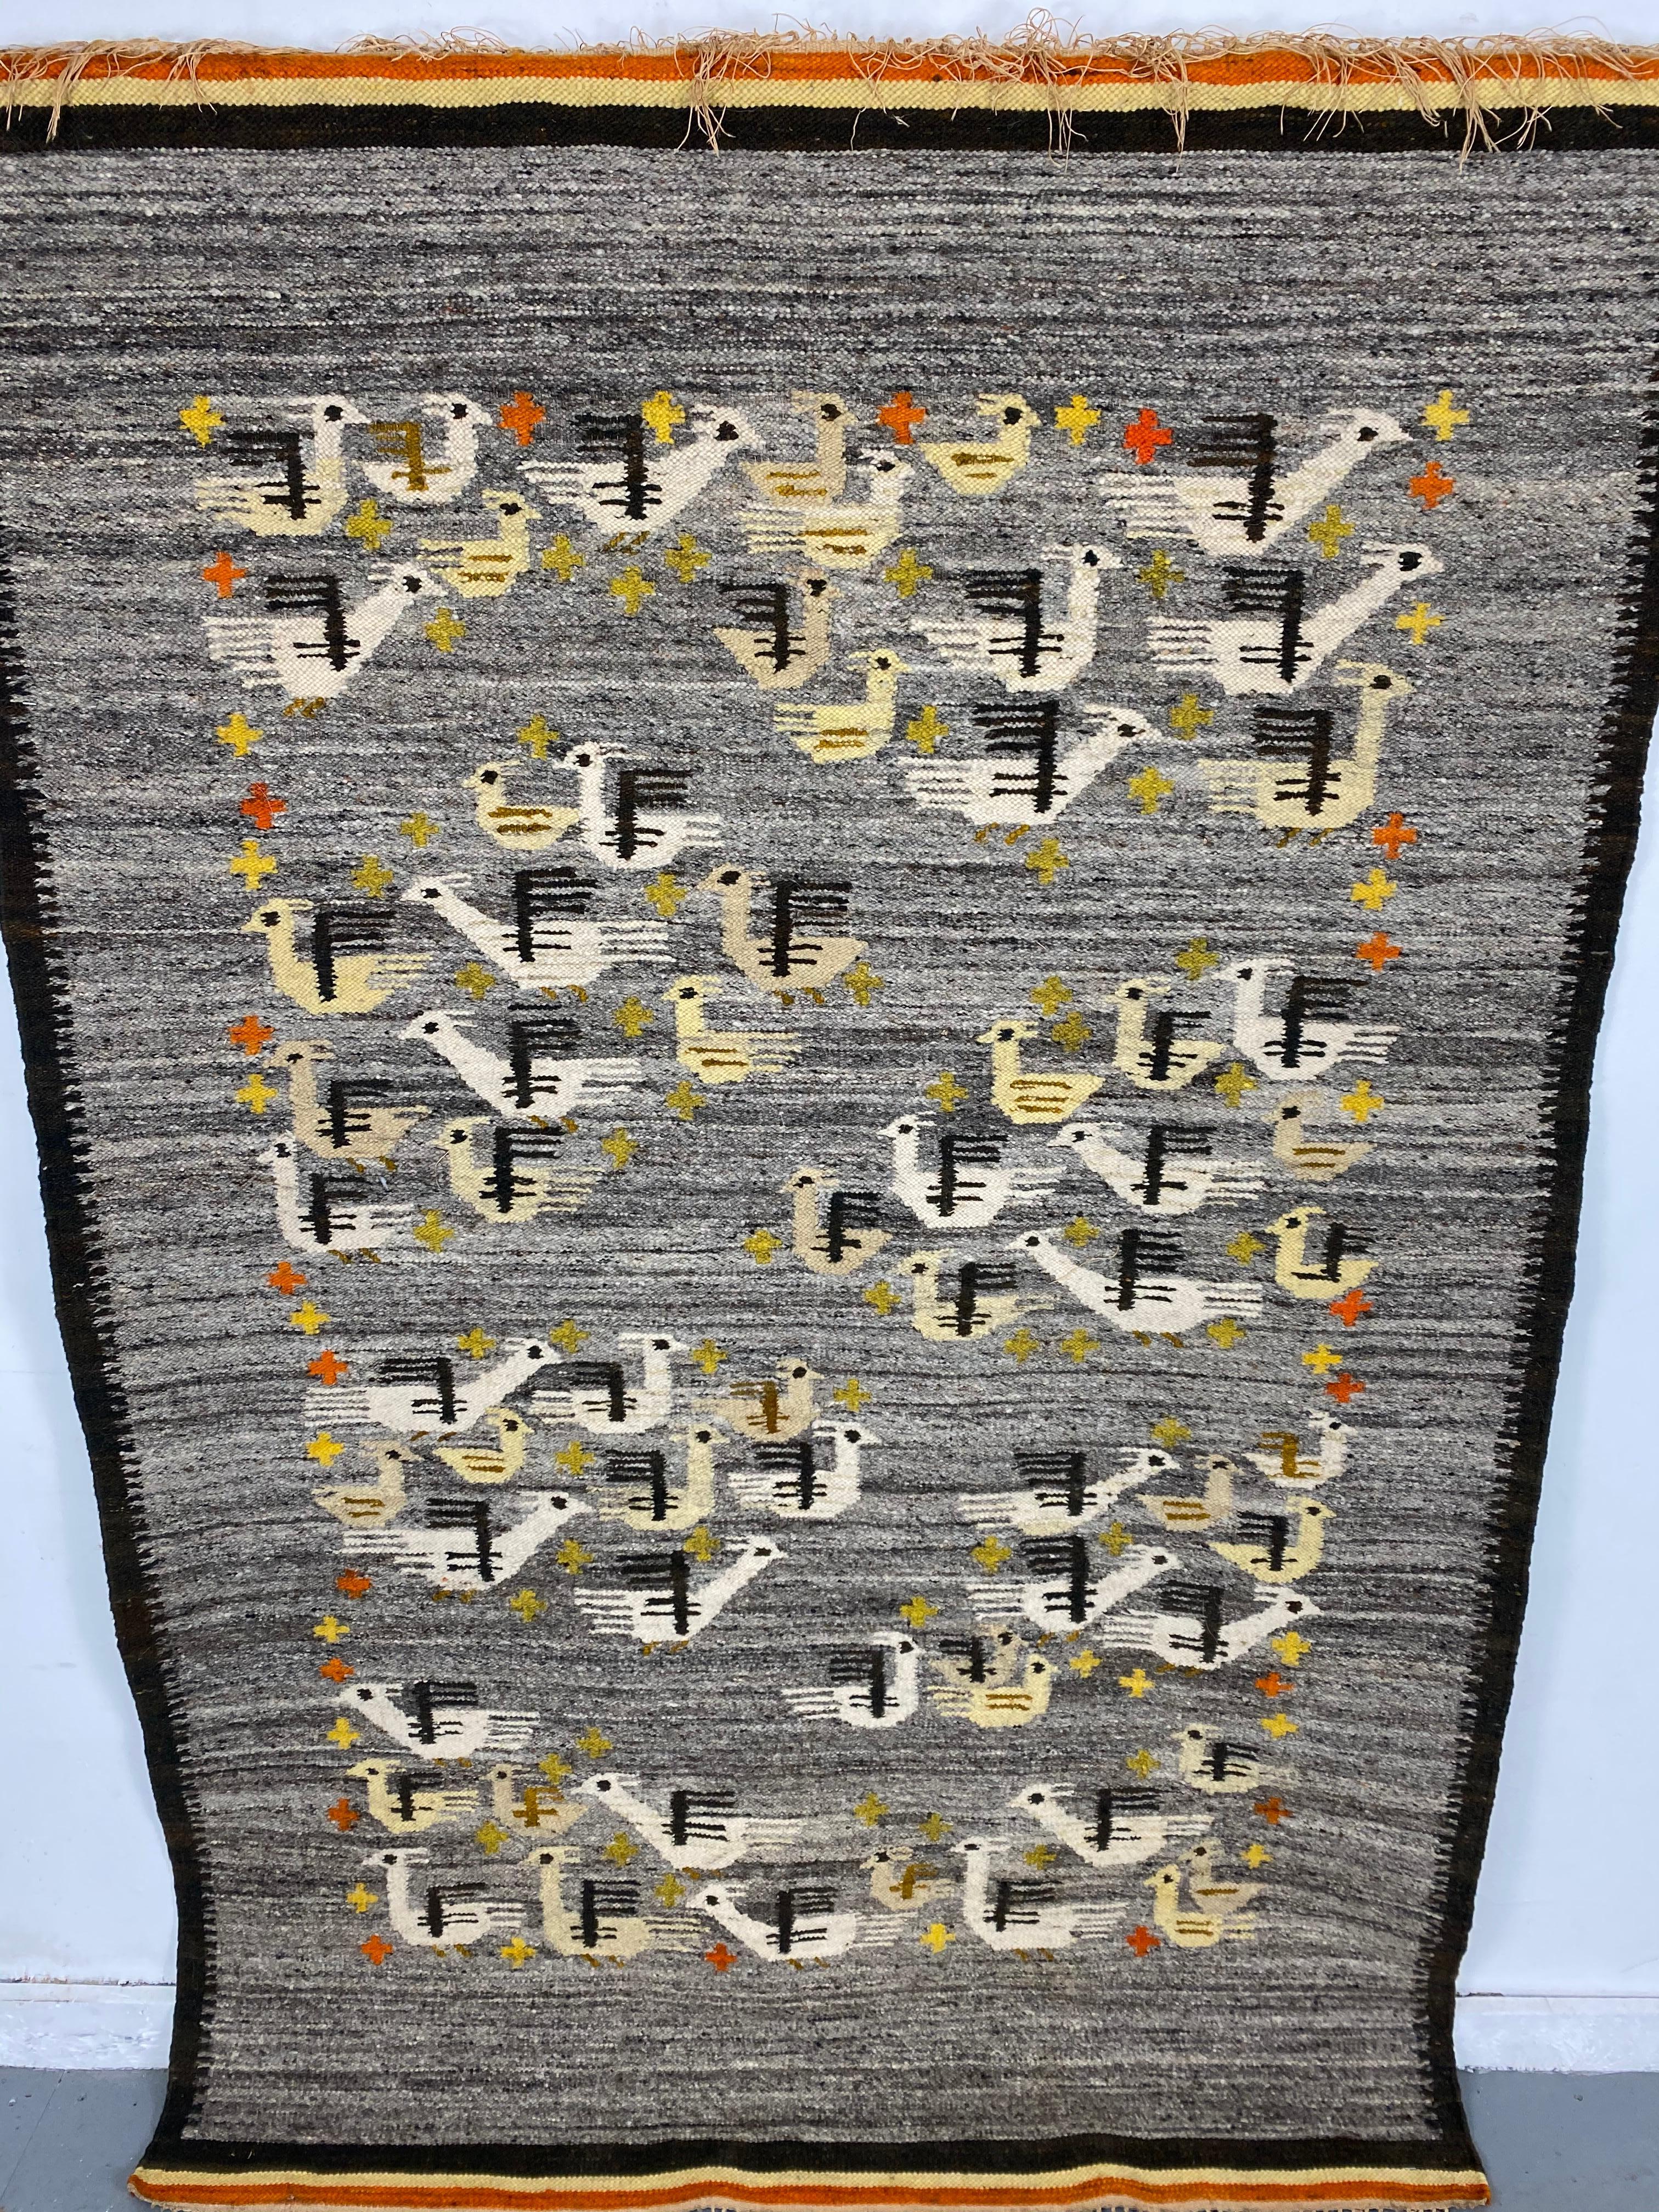 Handwoven midcentury Swedish rug or wall hanging with stylized bird design, this weaving has been set up as a wall hanging,
Size: 49